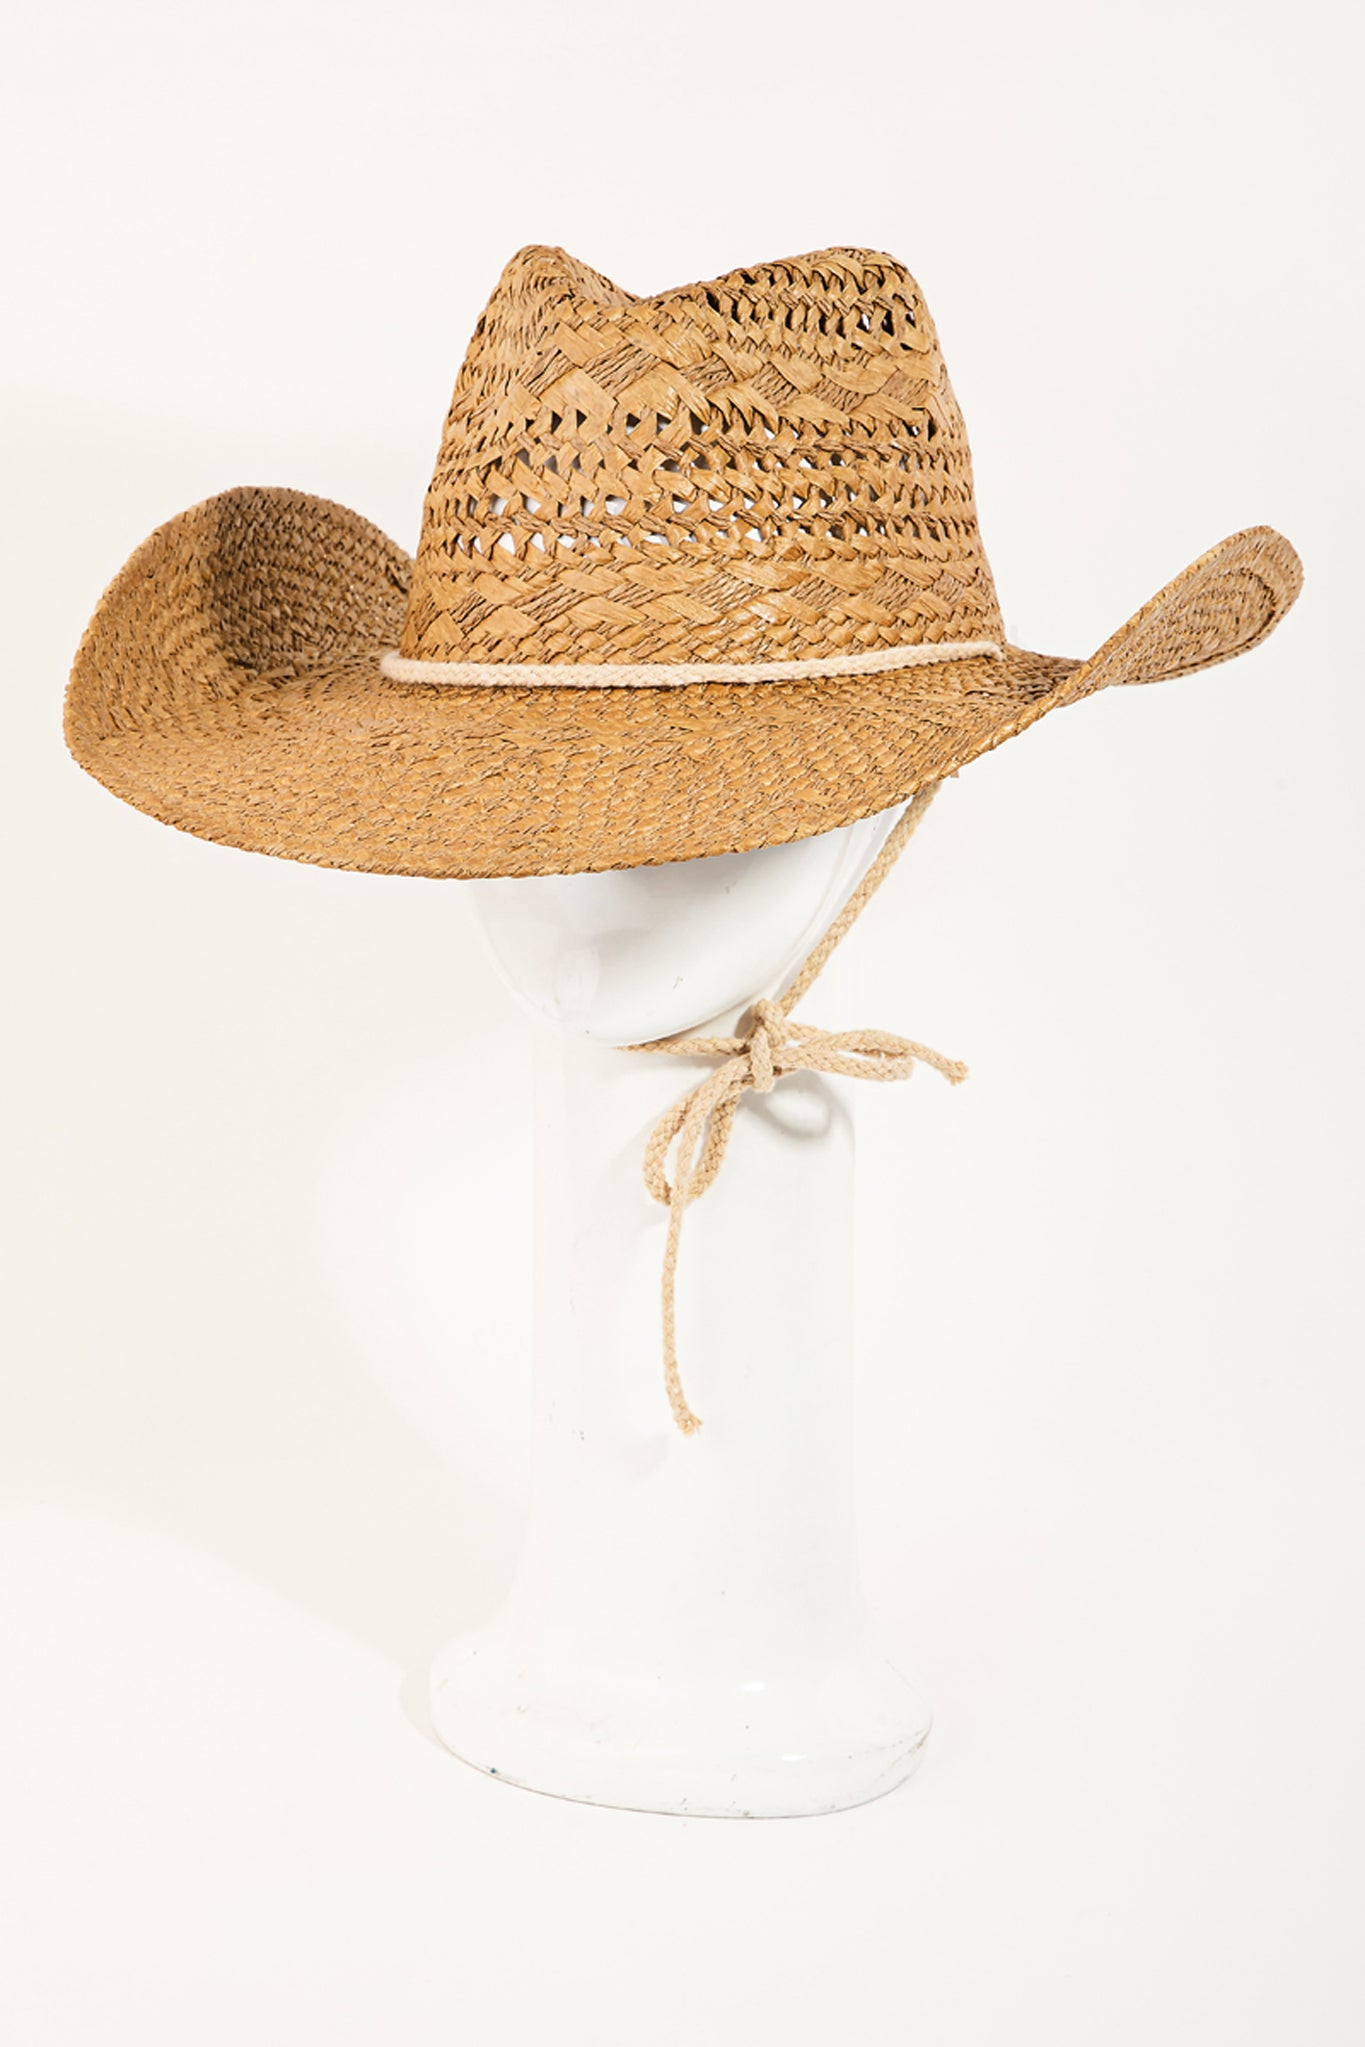 View 1 of Capo Straw Cowboy Hat in Khaki, a Hats from Larrea Cove. Detail: 
Add a touch of coastal c...